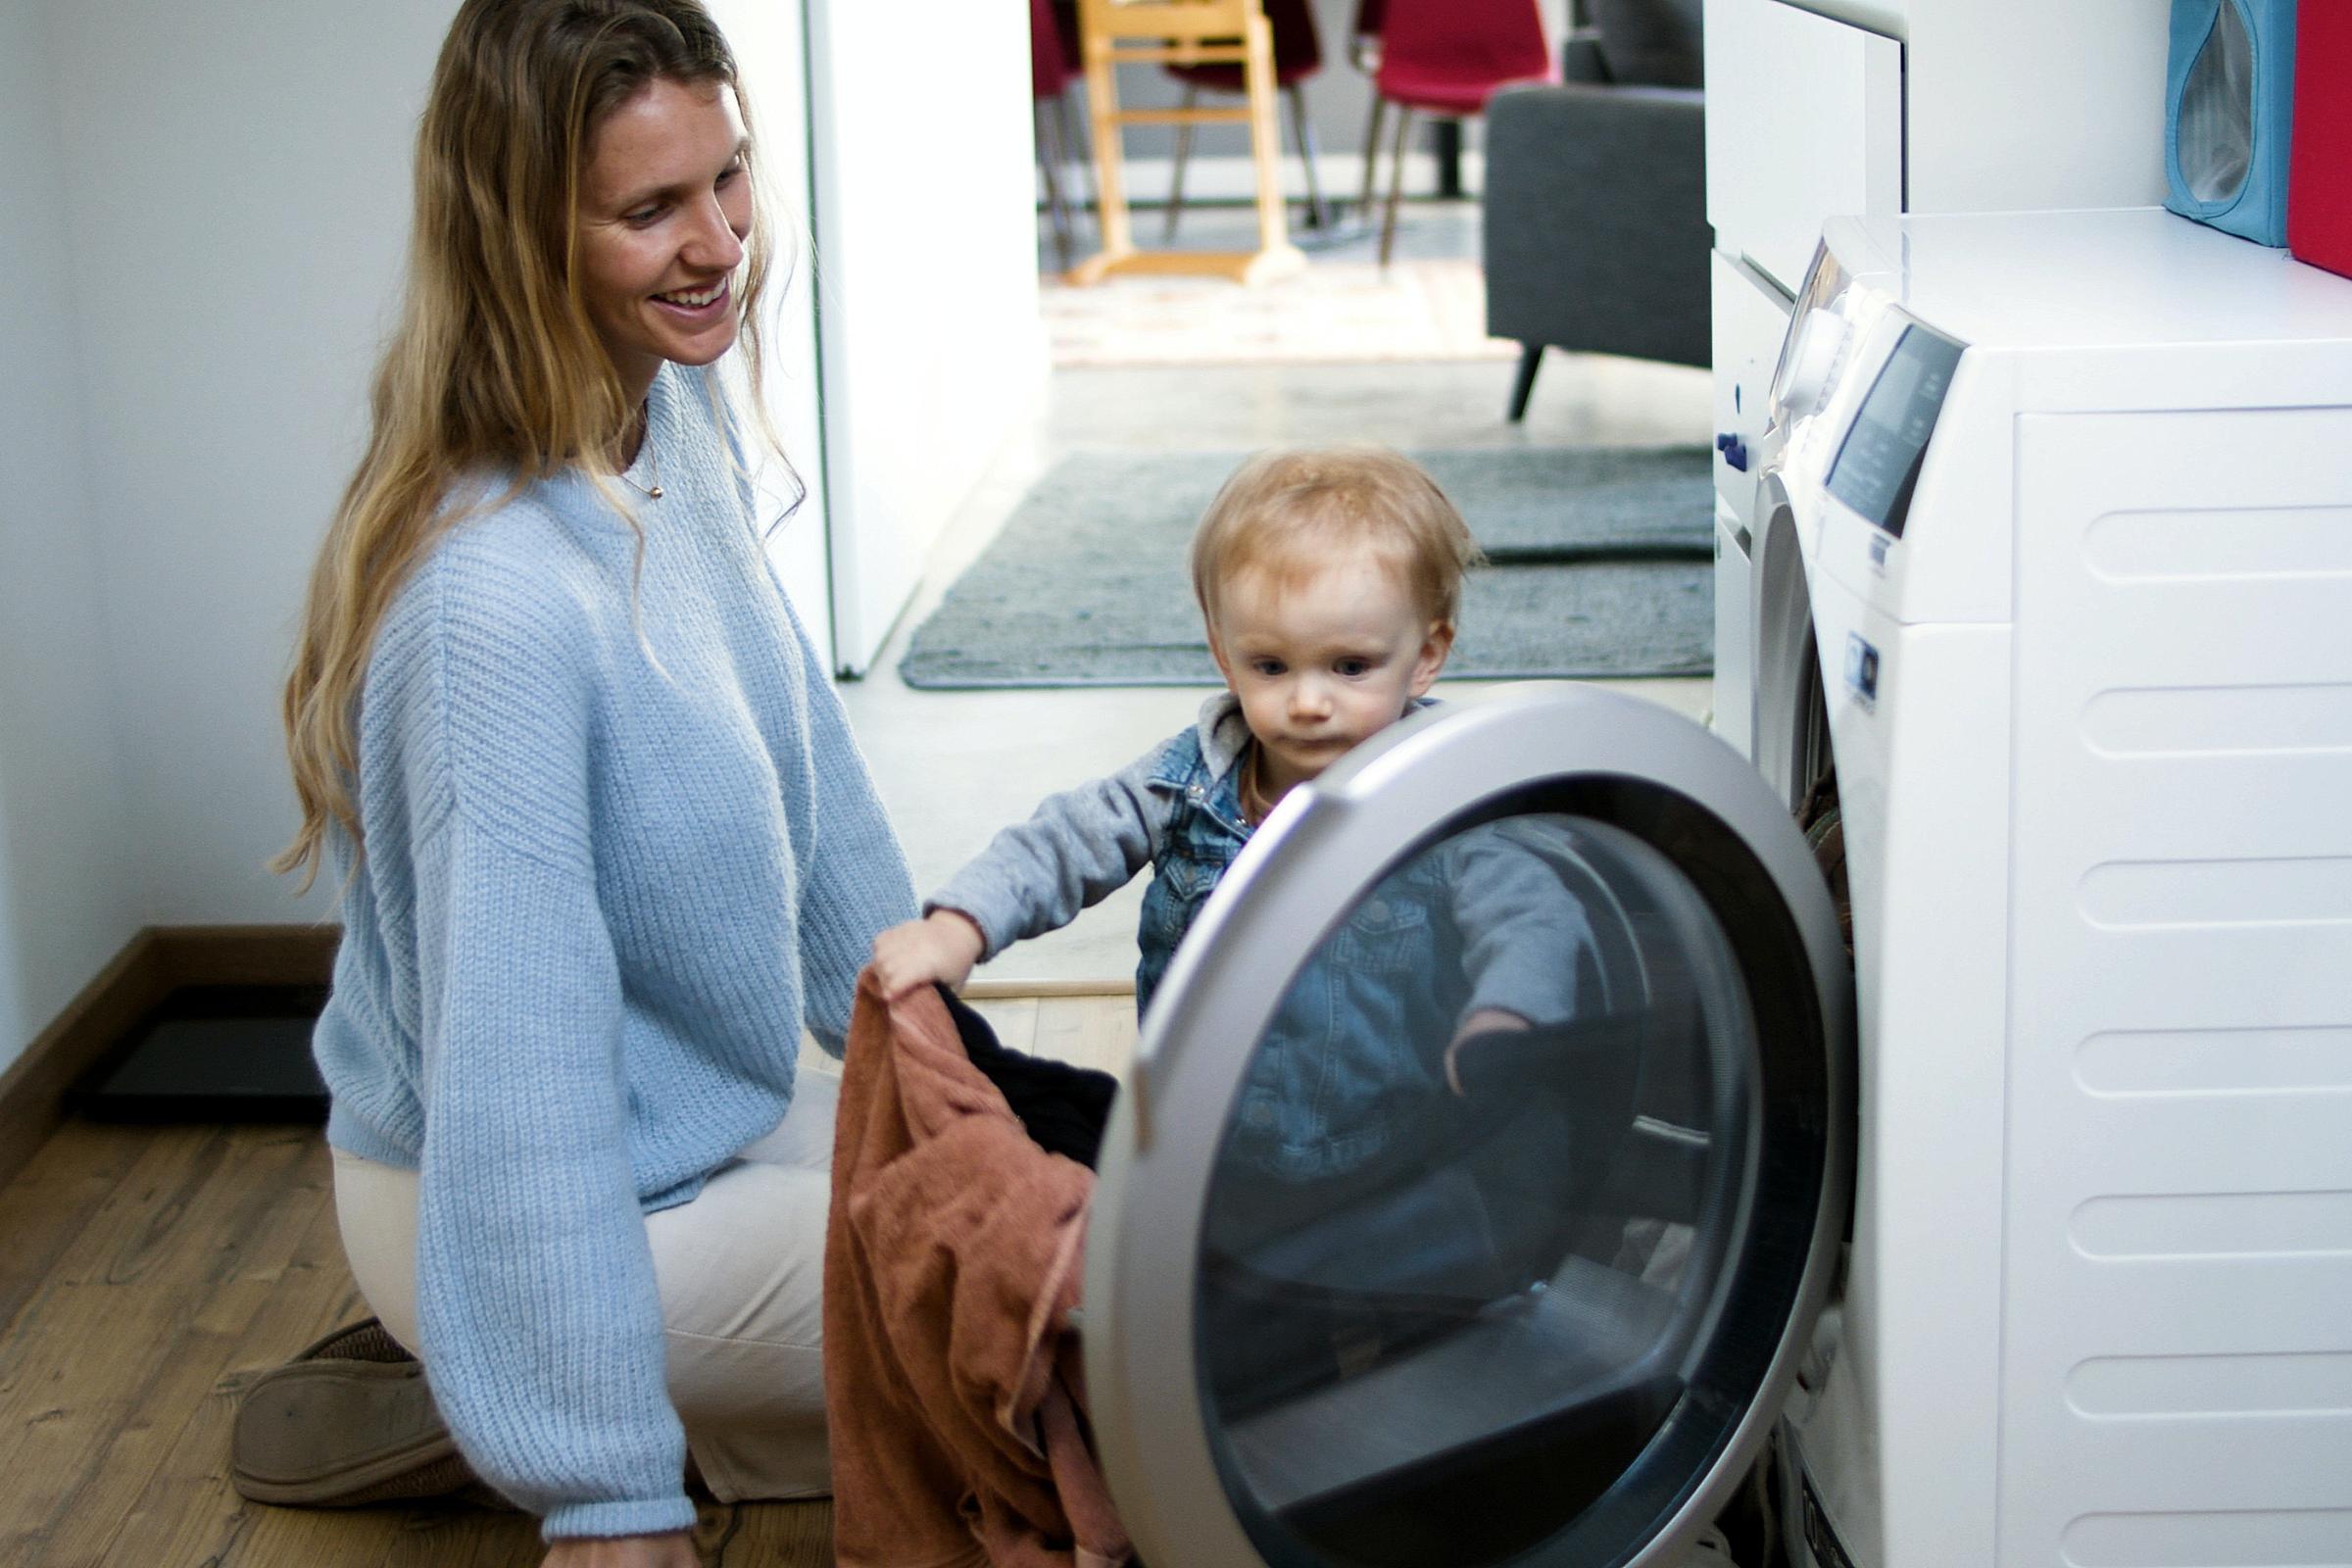 Woman and toddler knelt on floor putting laundry into washing machine